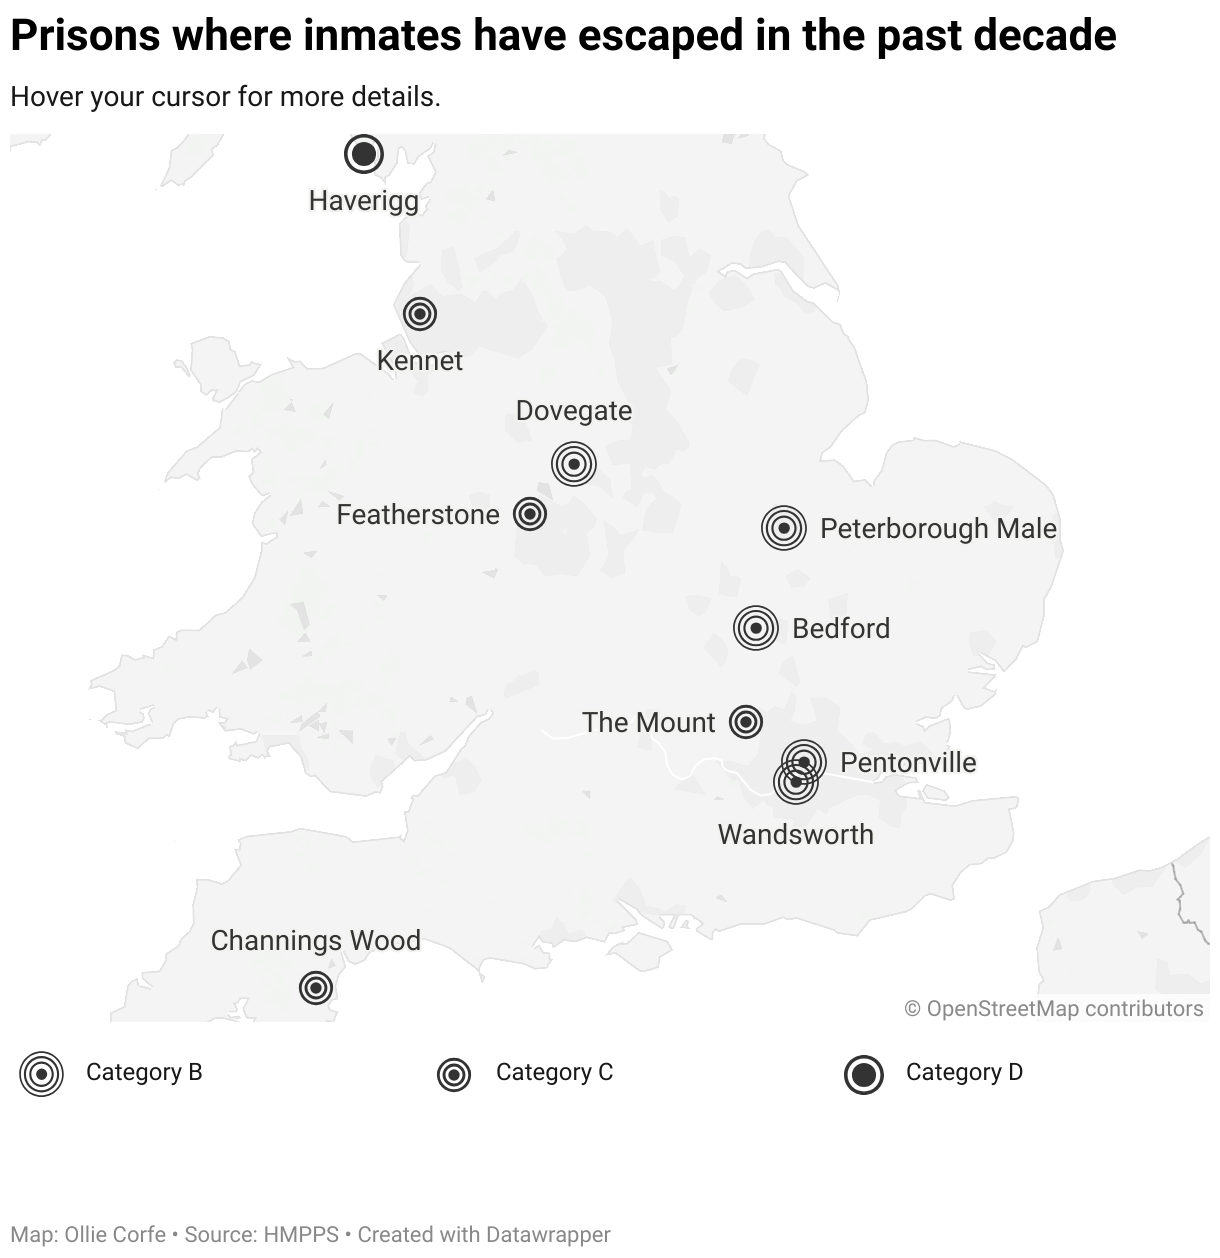 Prisons where inmates have escaped.